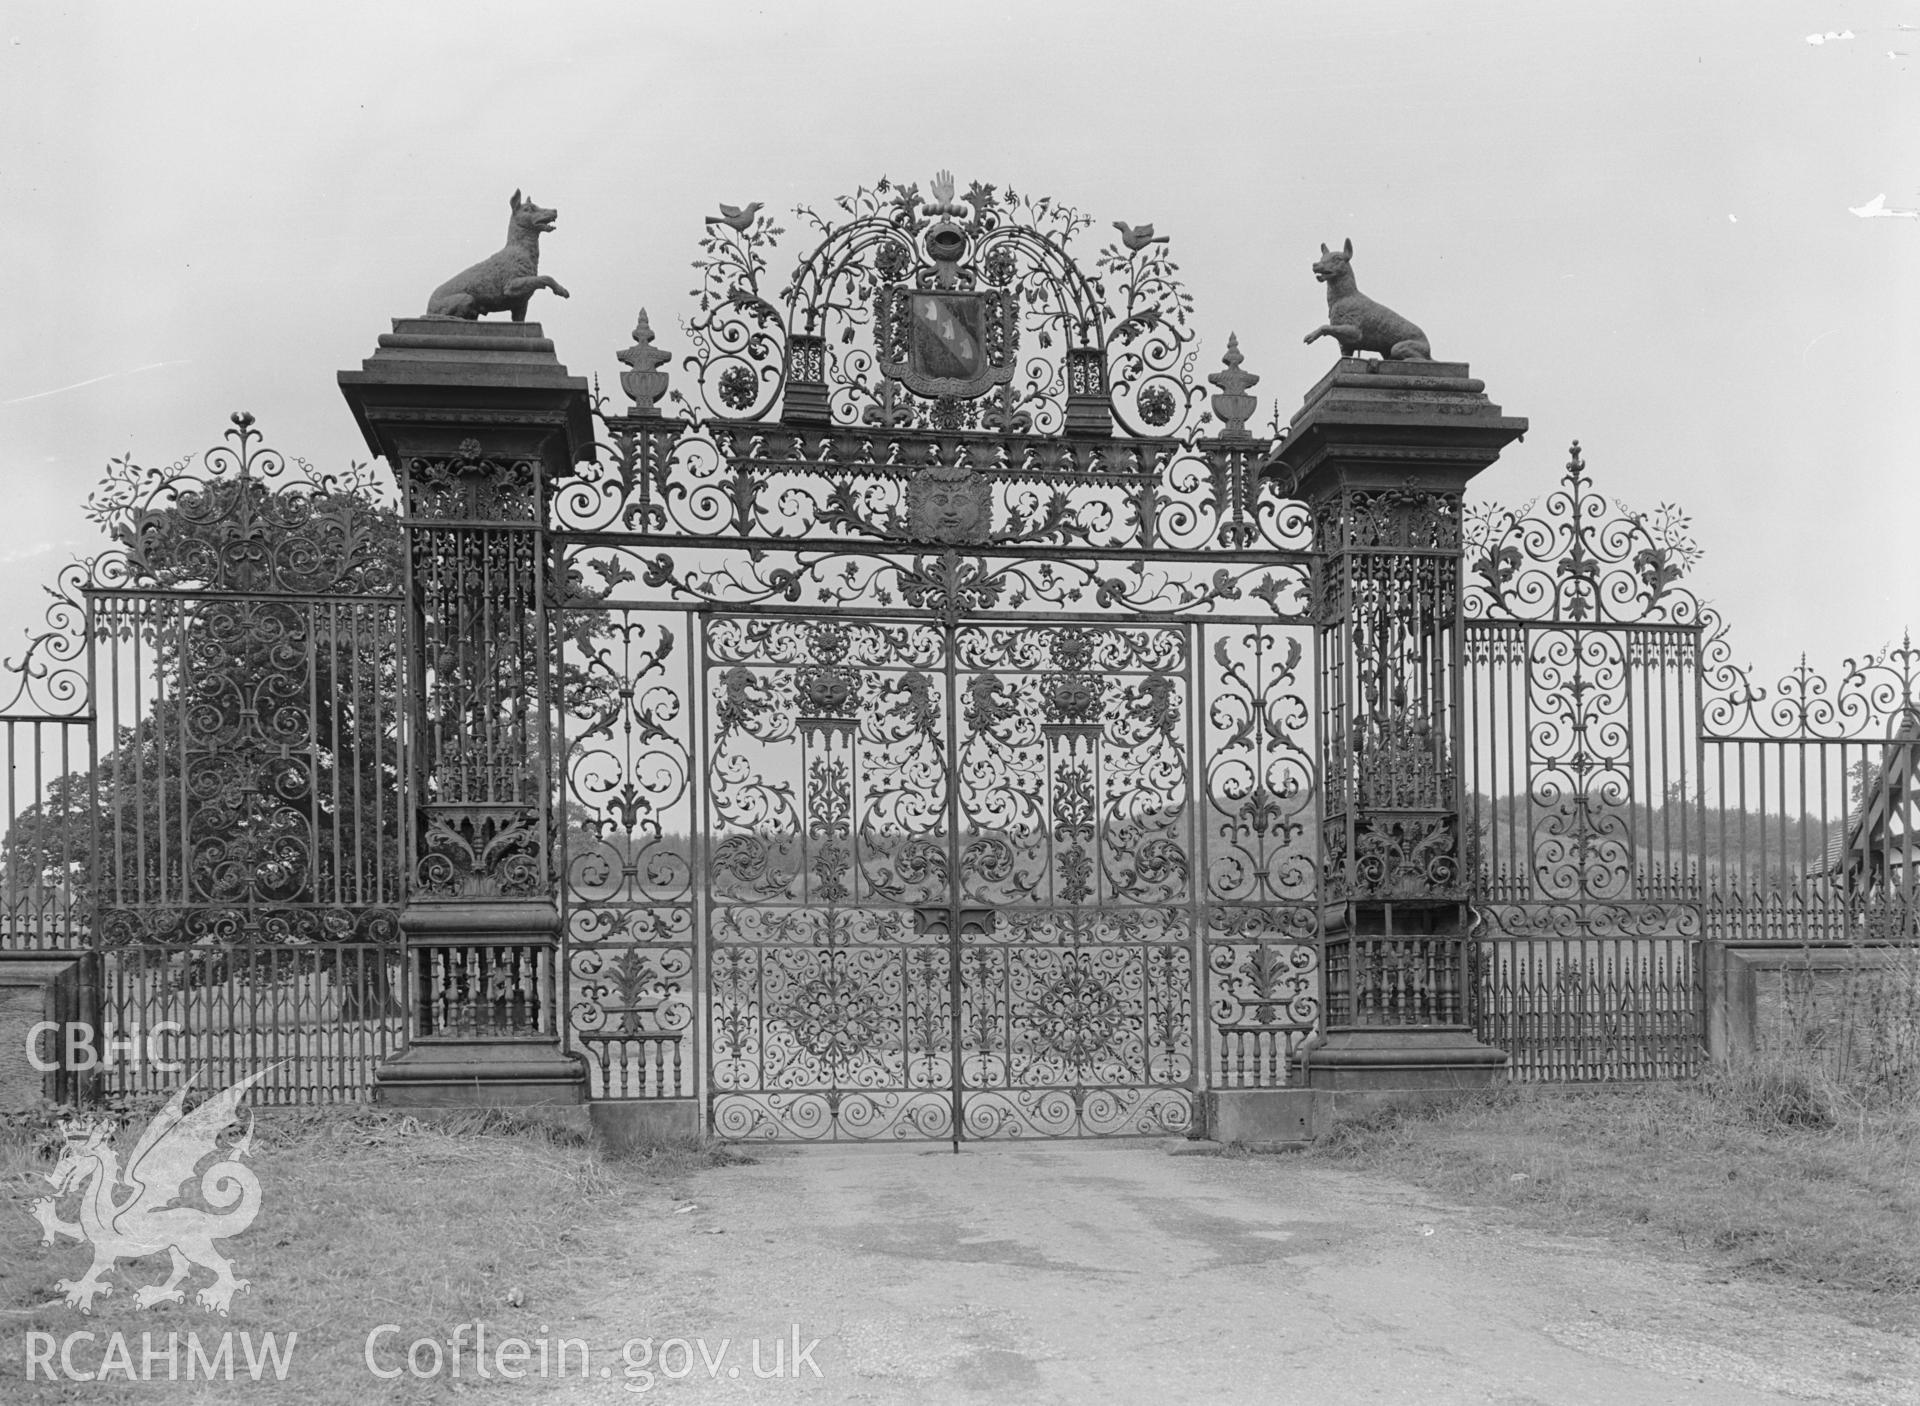 East side of the main gates.